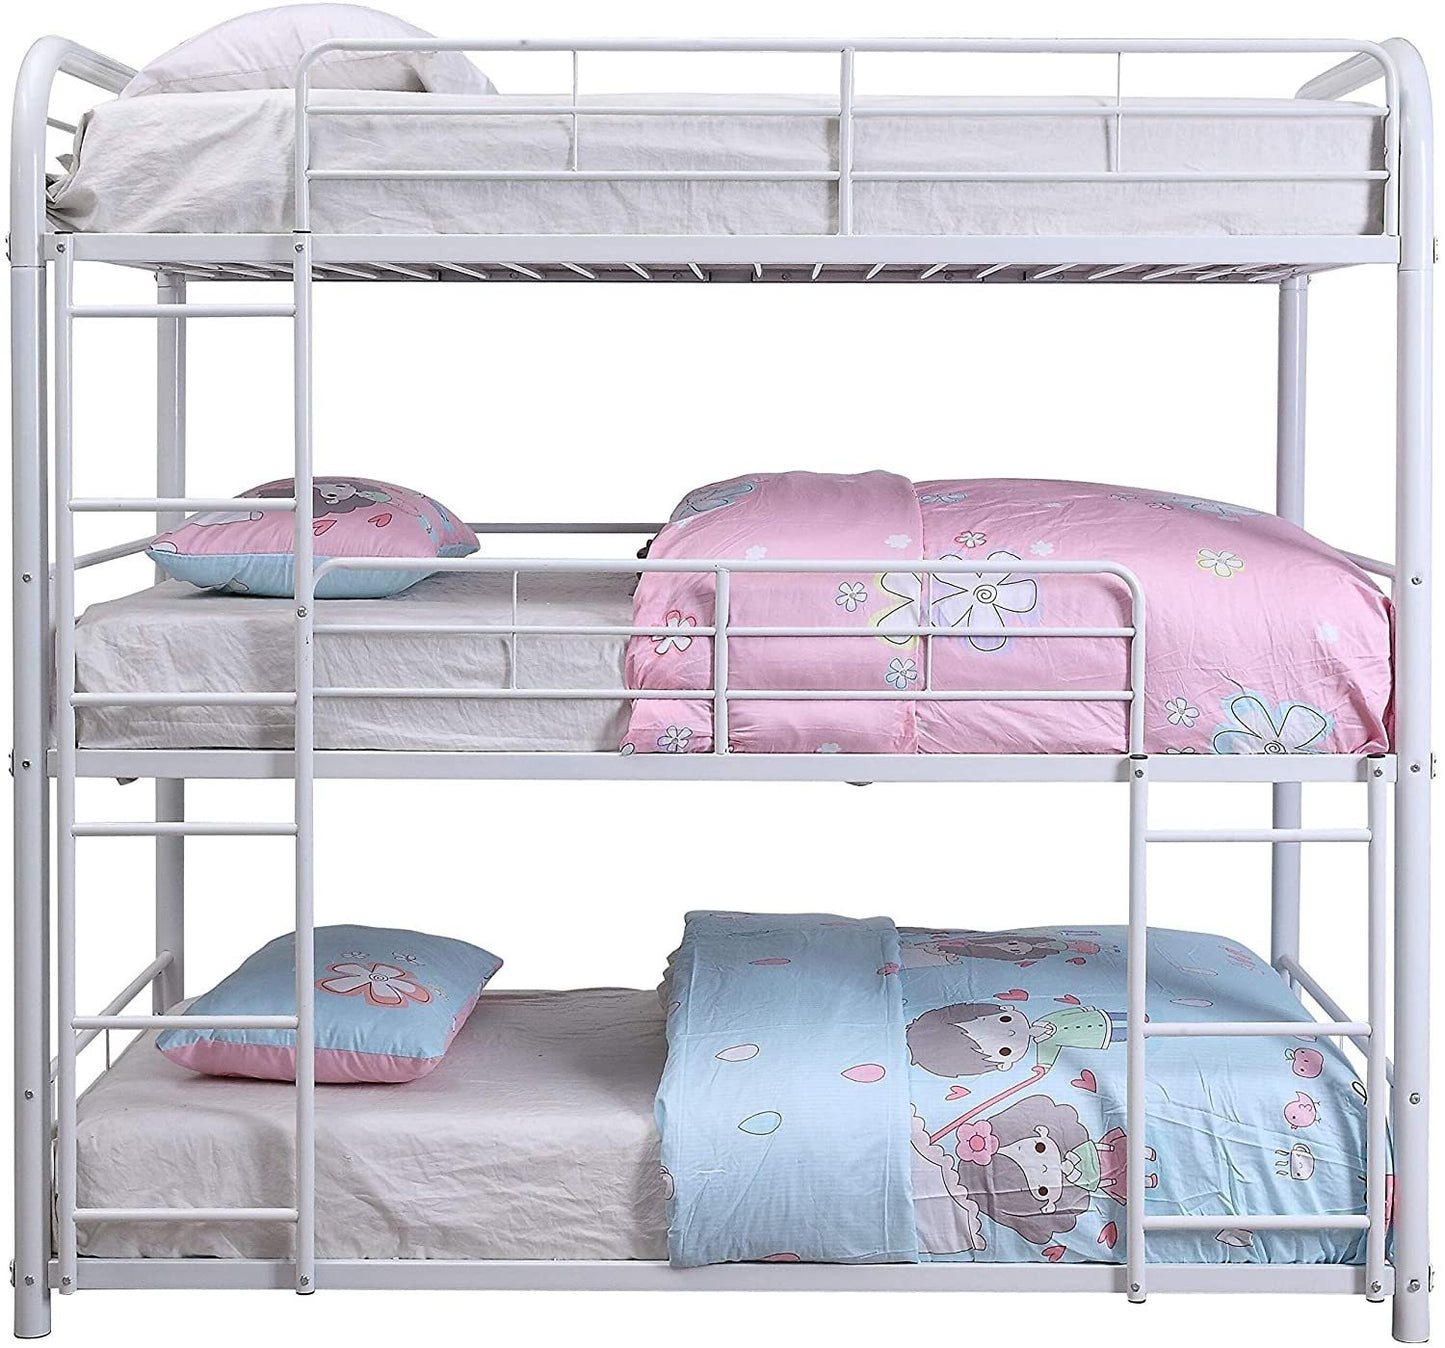 ACME Cairo Bunk Bed - Triple Twin in White 38110